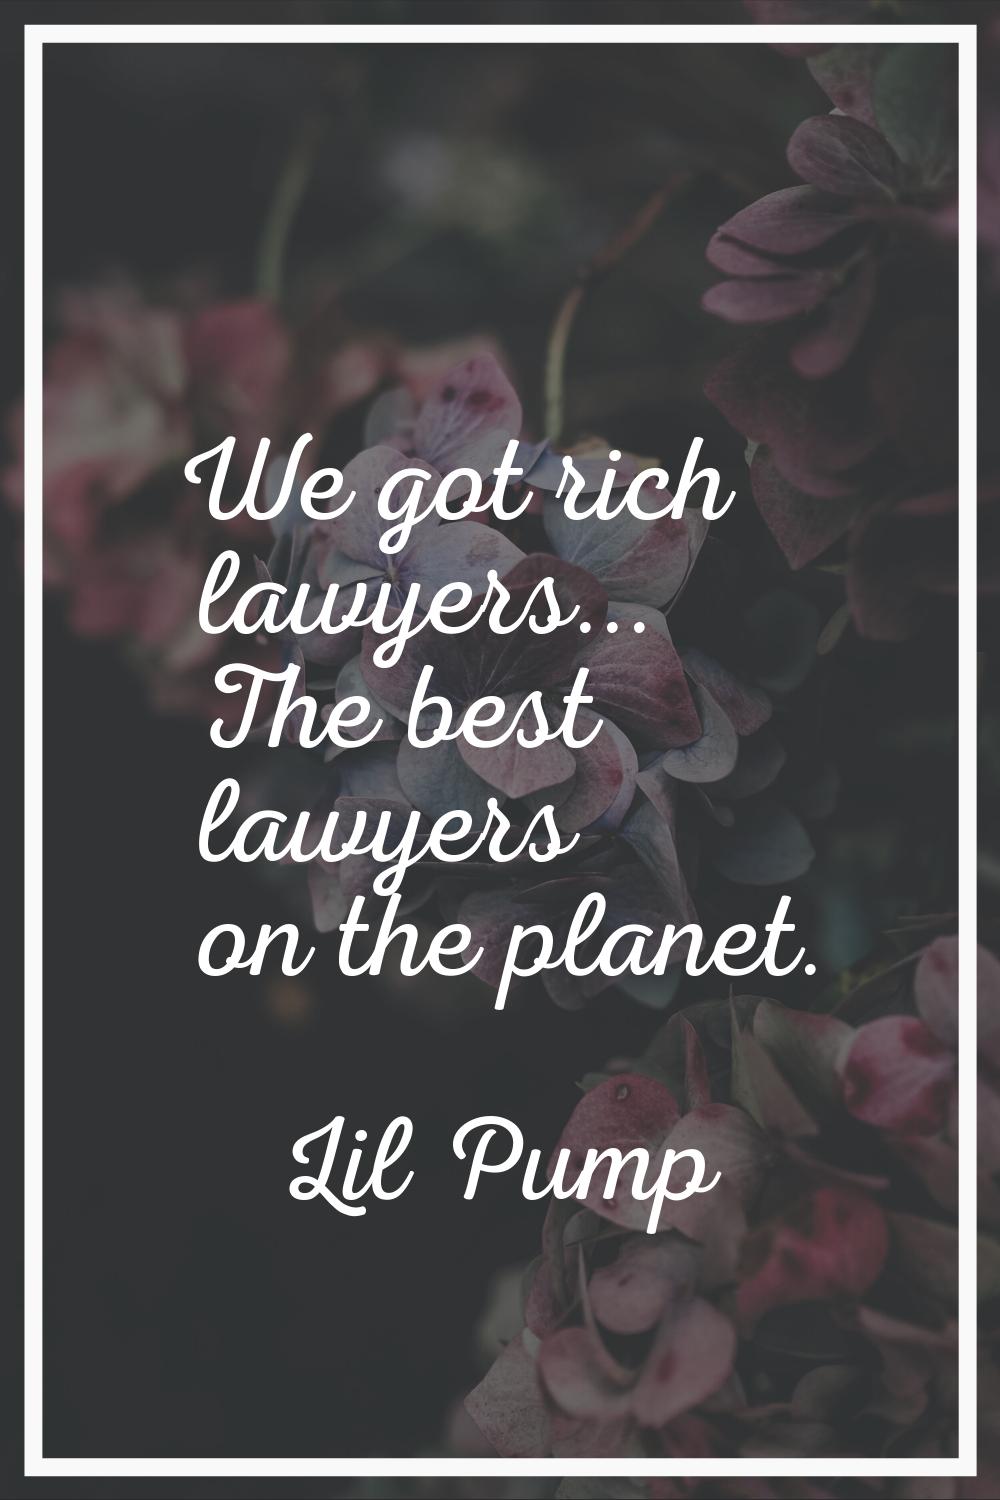 We got rich lawyers... The best lawyers on the planet.